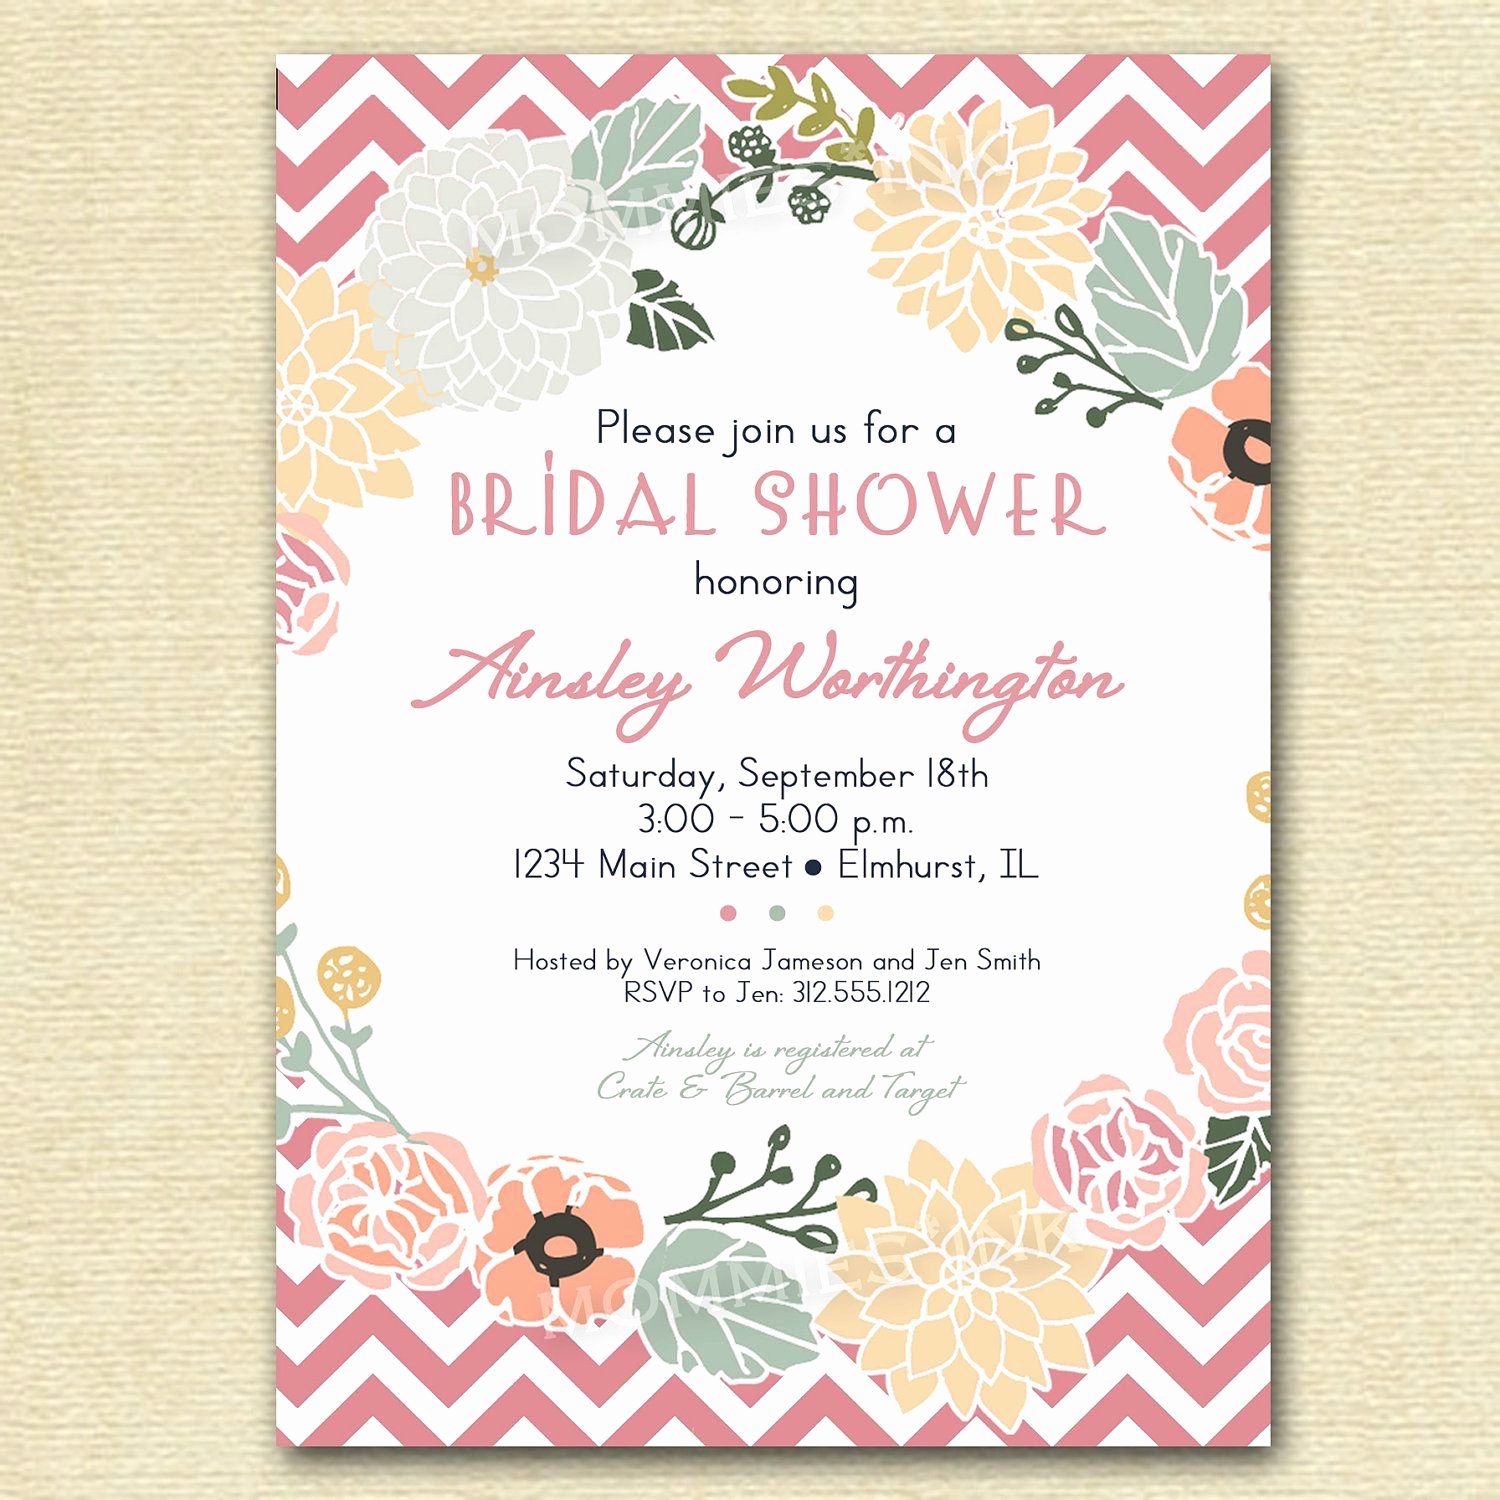 Bridal Shower Invite Template Awesome event Invitation Graduation Invitations New Invitation